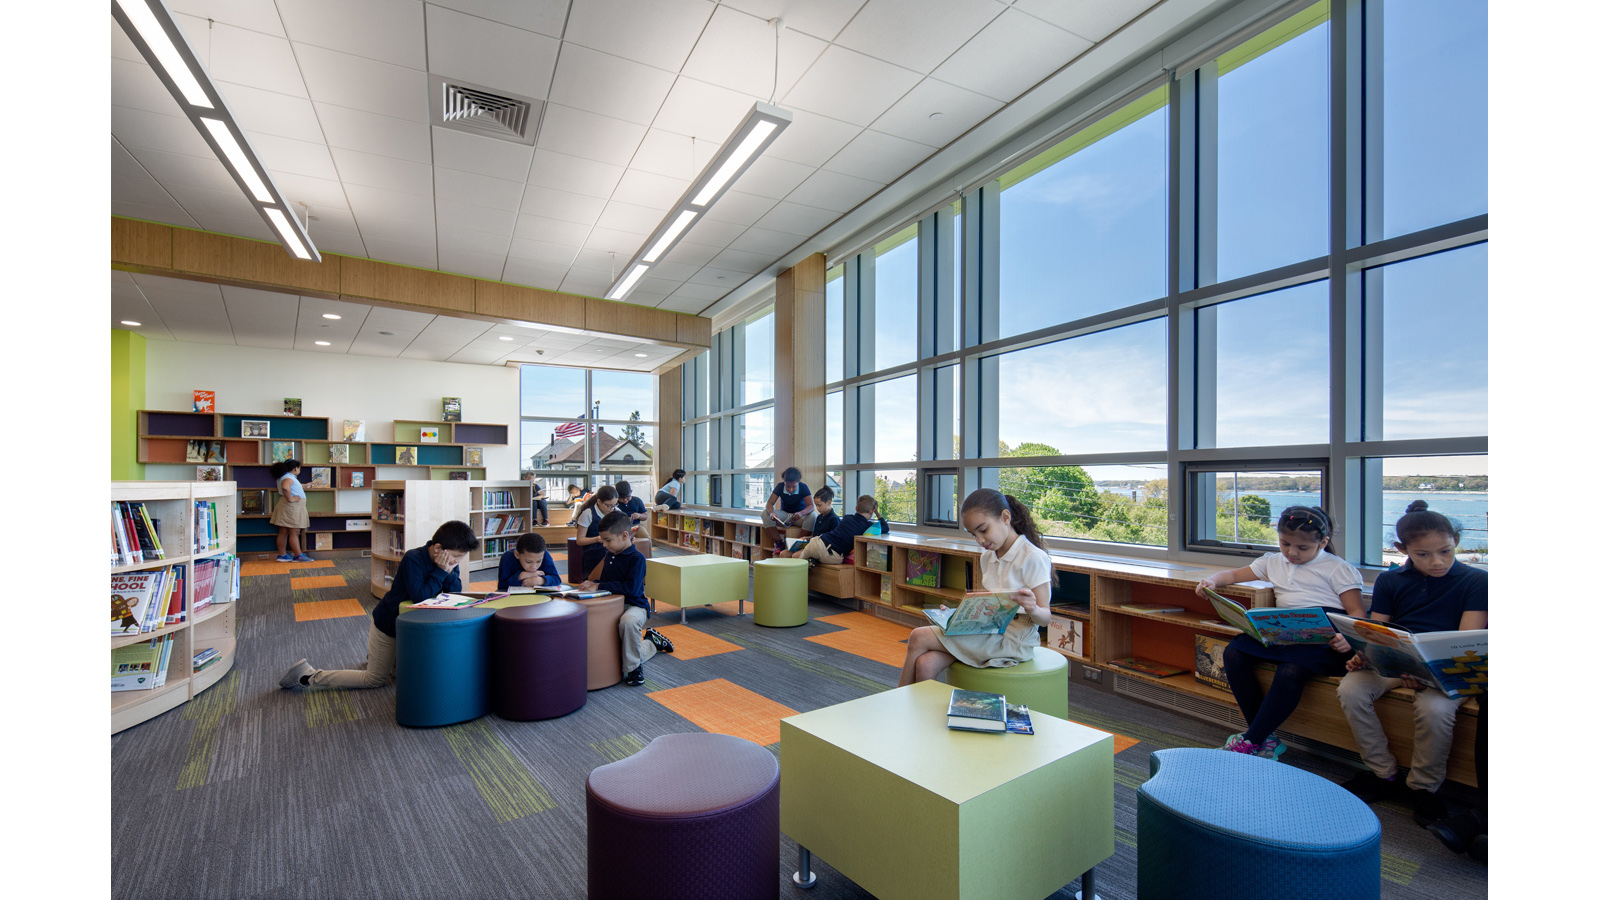 Irwin Jacobs Elementary School Interior, students enjoy the library, which overlooks the river